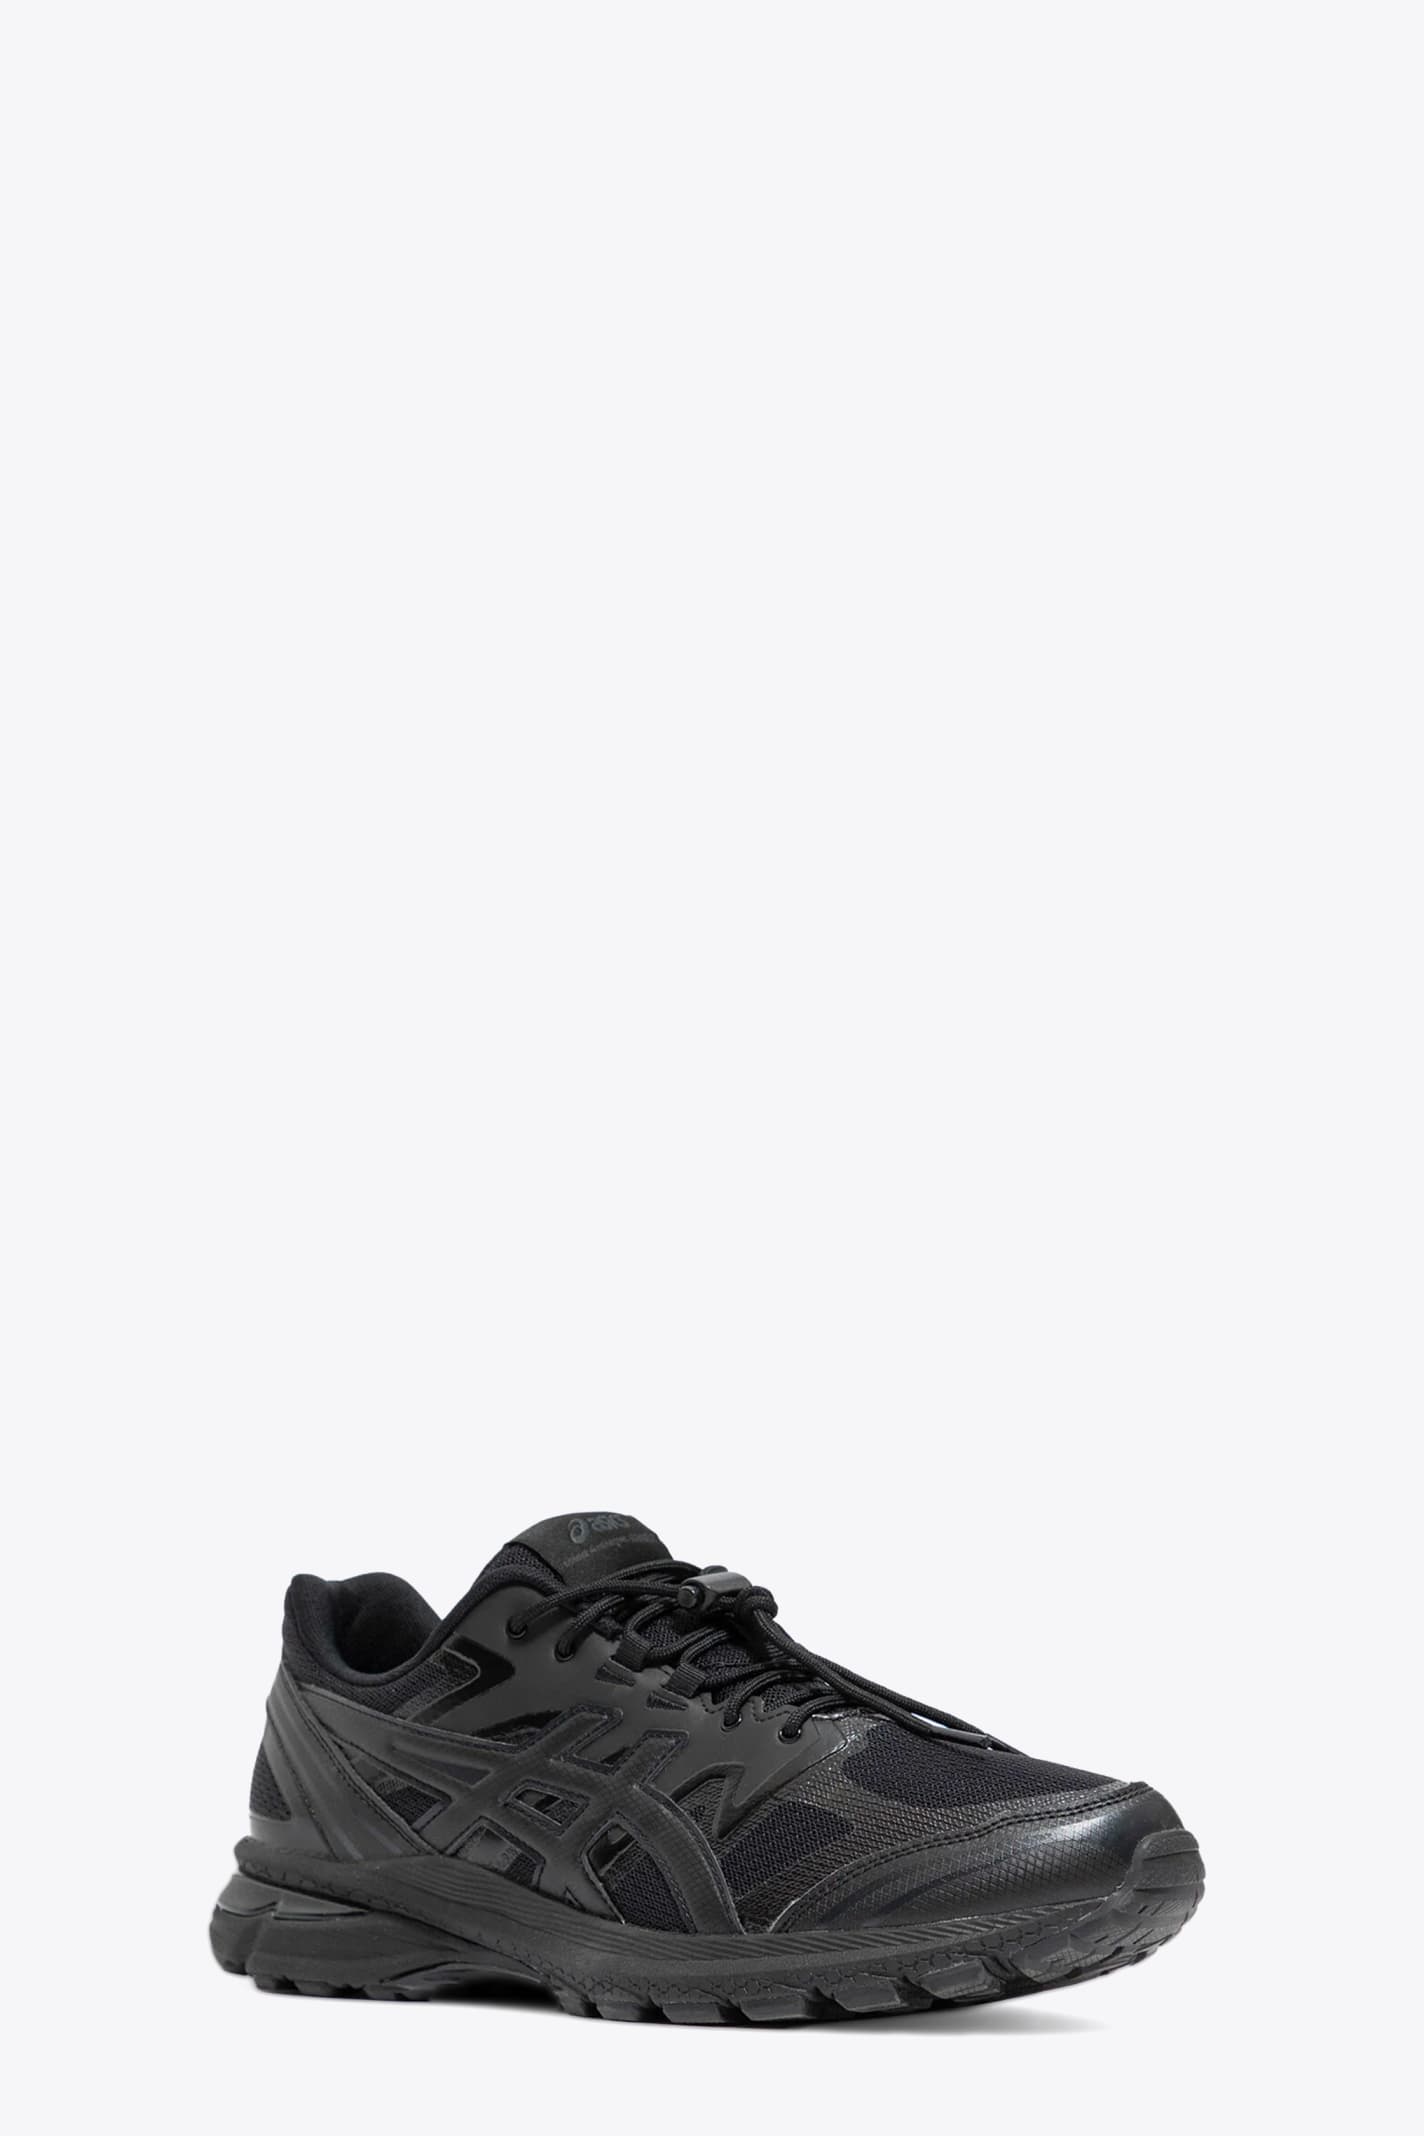 Shop Comme Des Garçons Shirt Mens Sneakers X Asics Asics Collaboration Black Mesh And Leather Running Sneaker In Nero